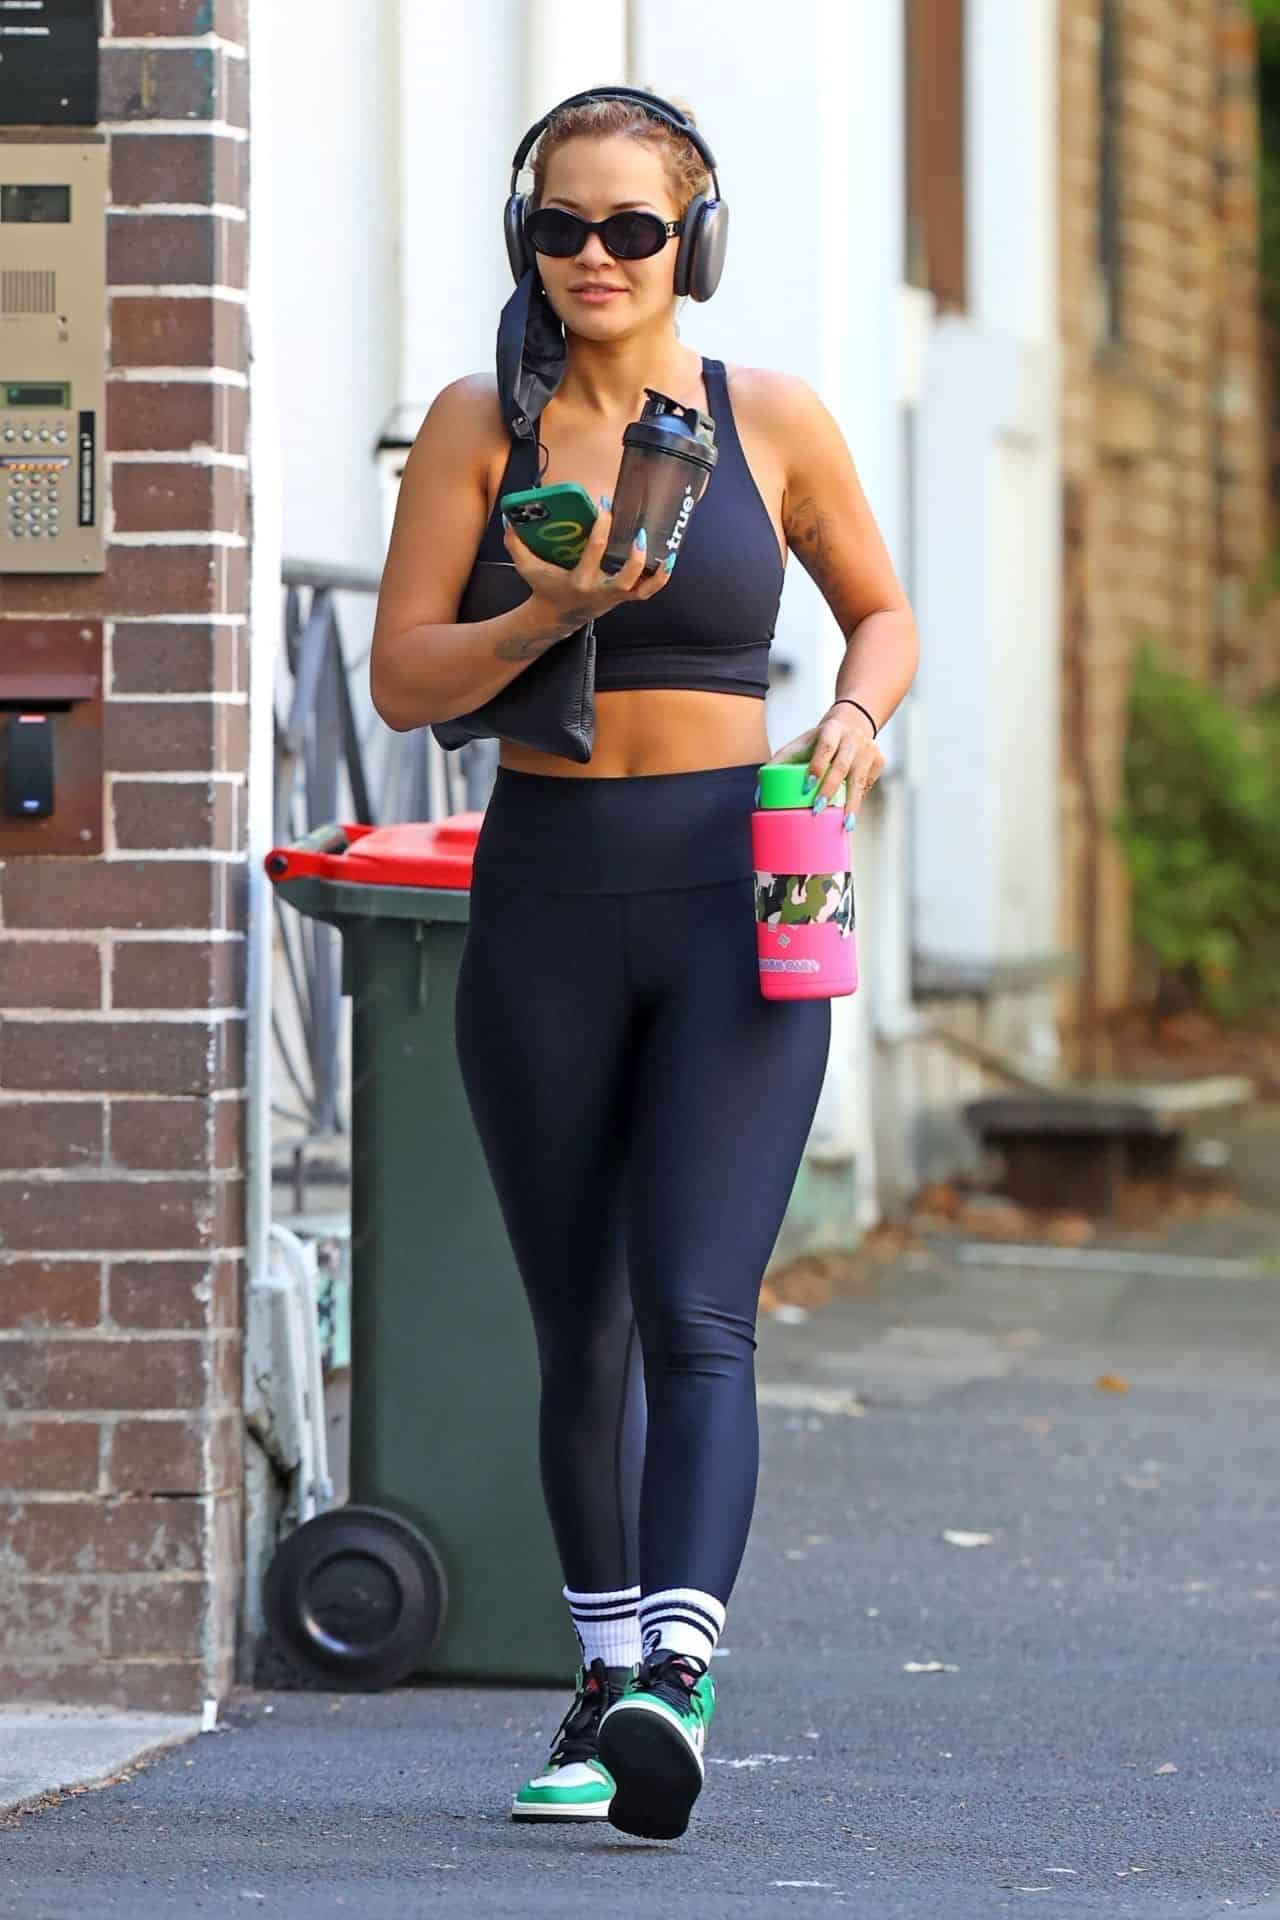 Rita Ora Sparkles in All-black Activewear after a Heavy Workout at the Gym in Sydney